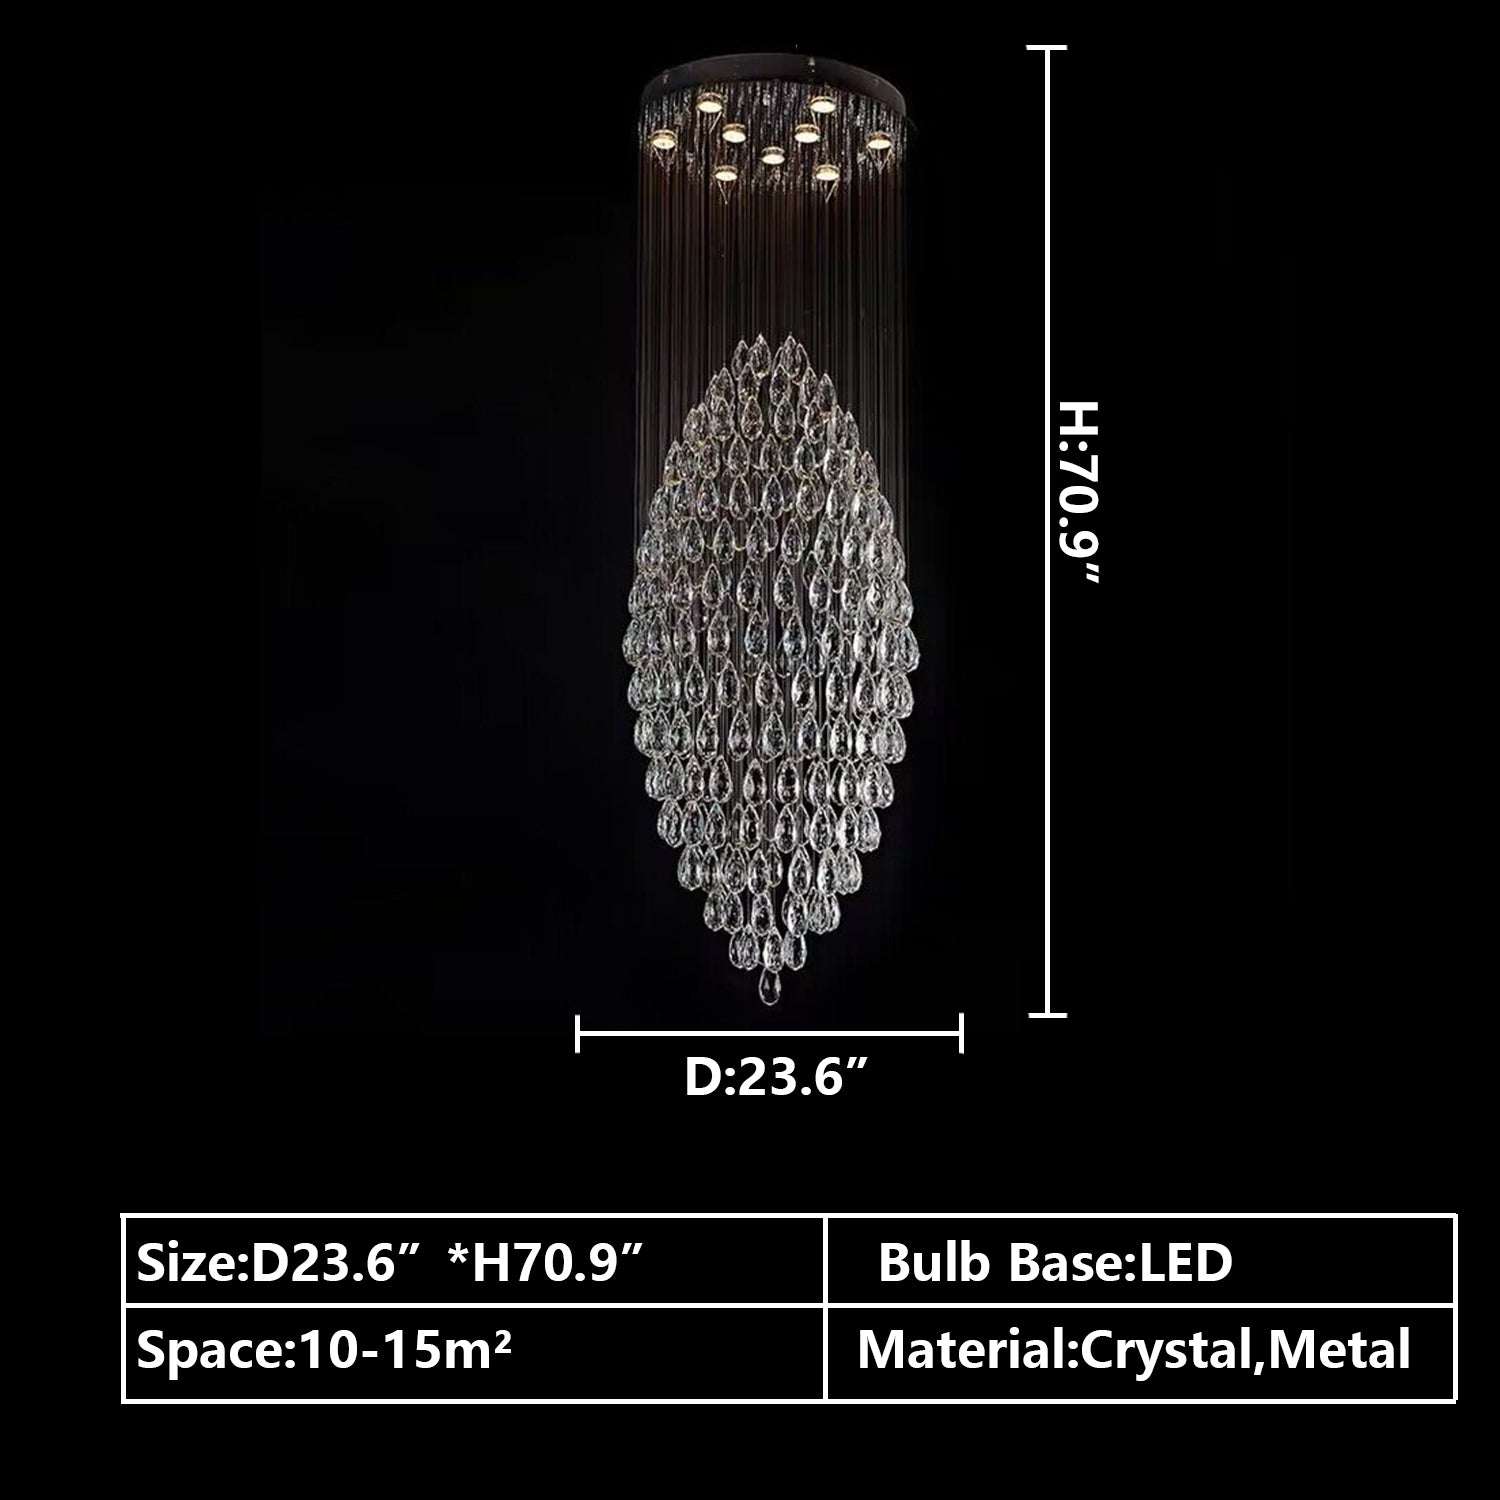 D23.6"*H70.9" chandelier,chandeliers,crystal,pendant,metal,oval,extra large,large,huge,big,oversized,long,raindrop,teardrop,flush mount,ceiling,living room,dining room,foyer,stairs,spiral staircase,entrys,hallway,hotel lobby,duplex hall,loft